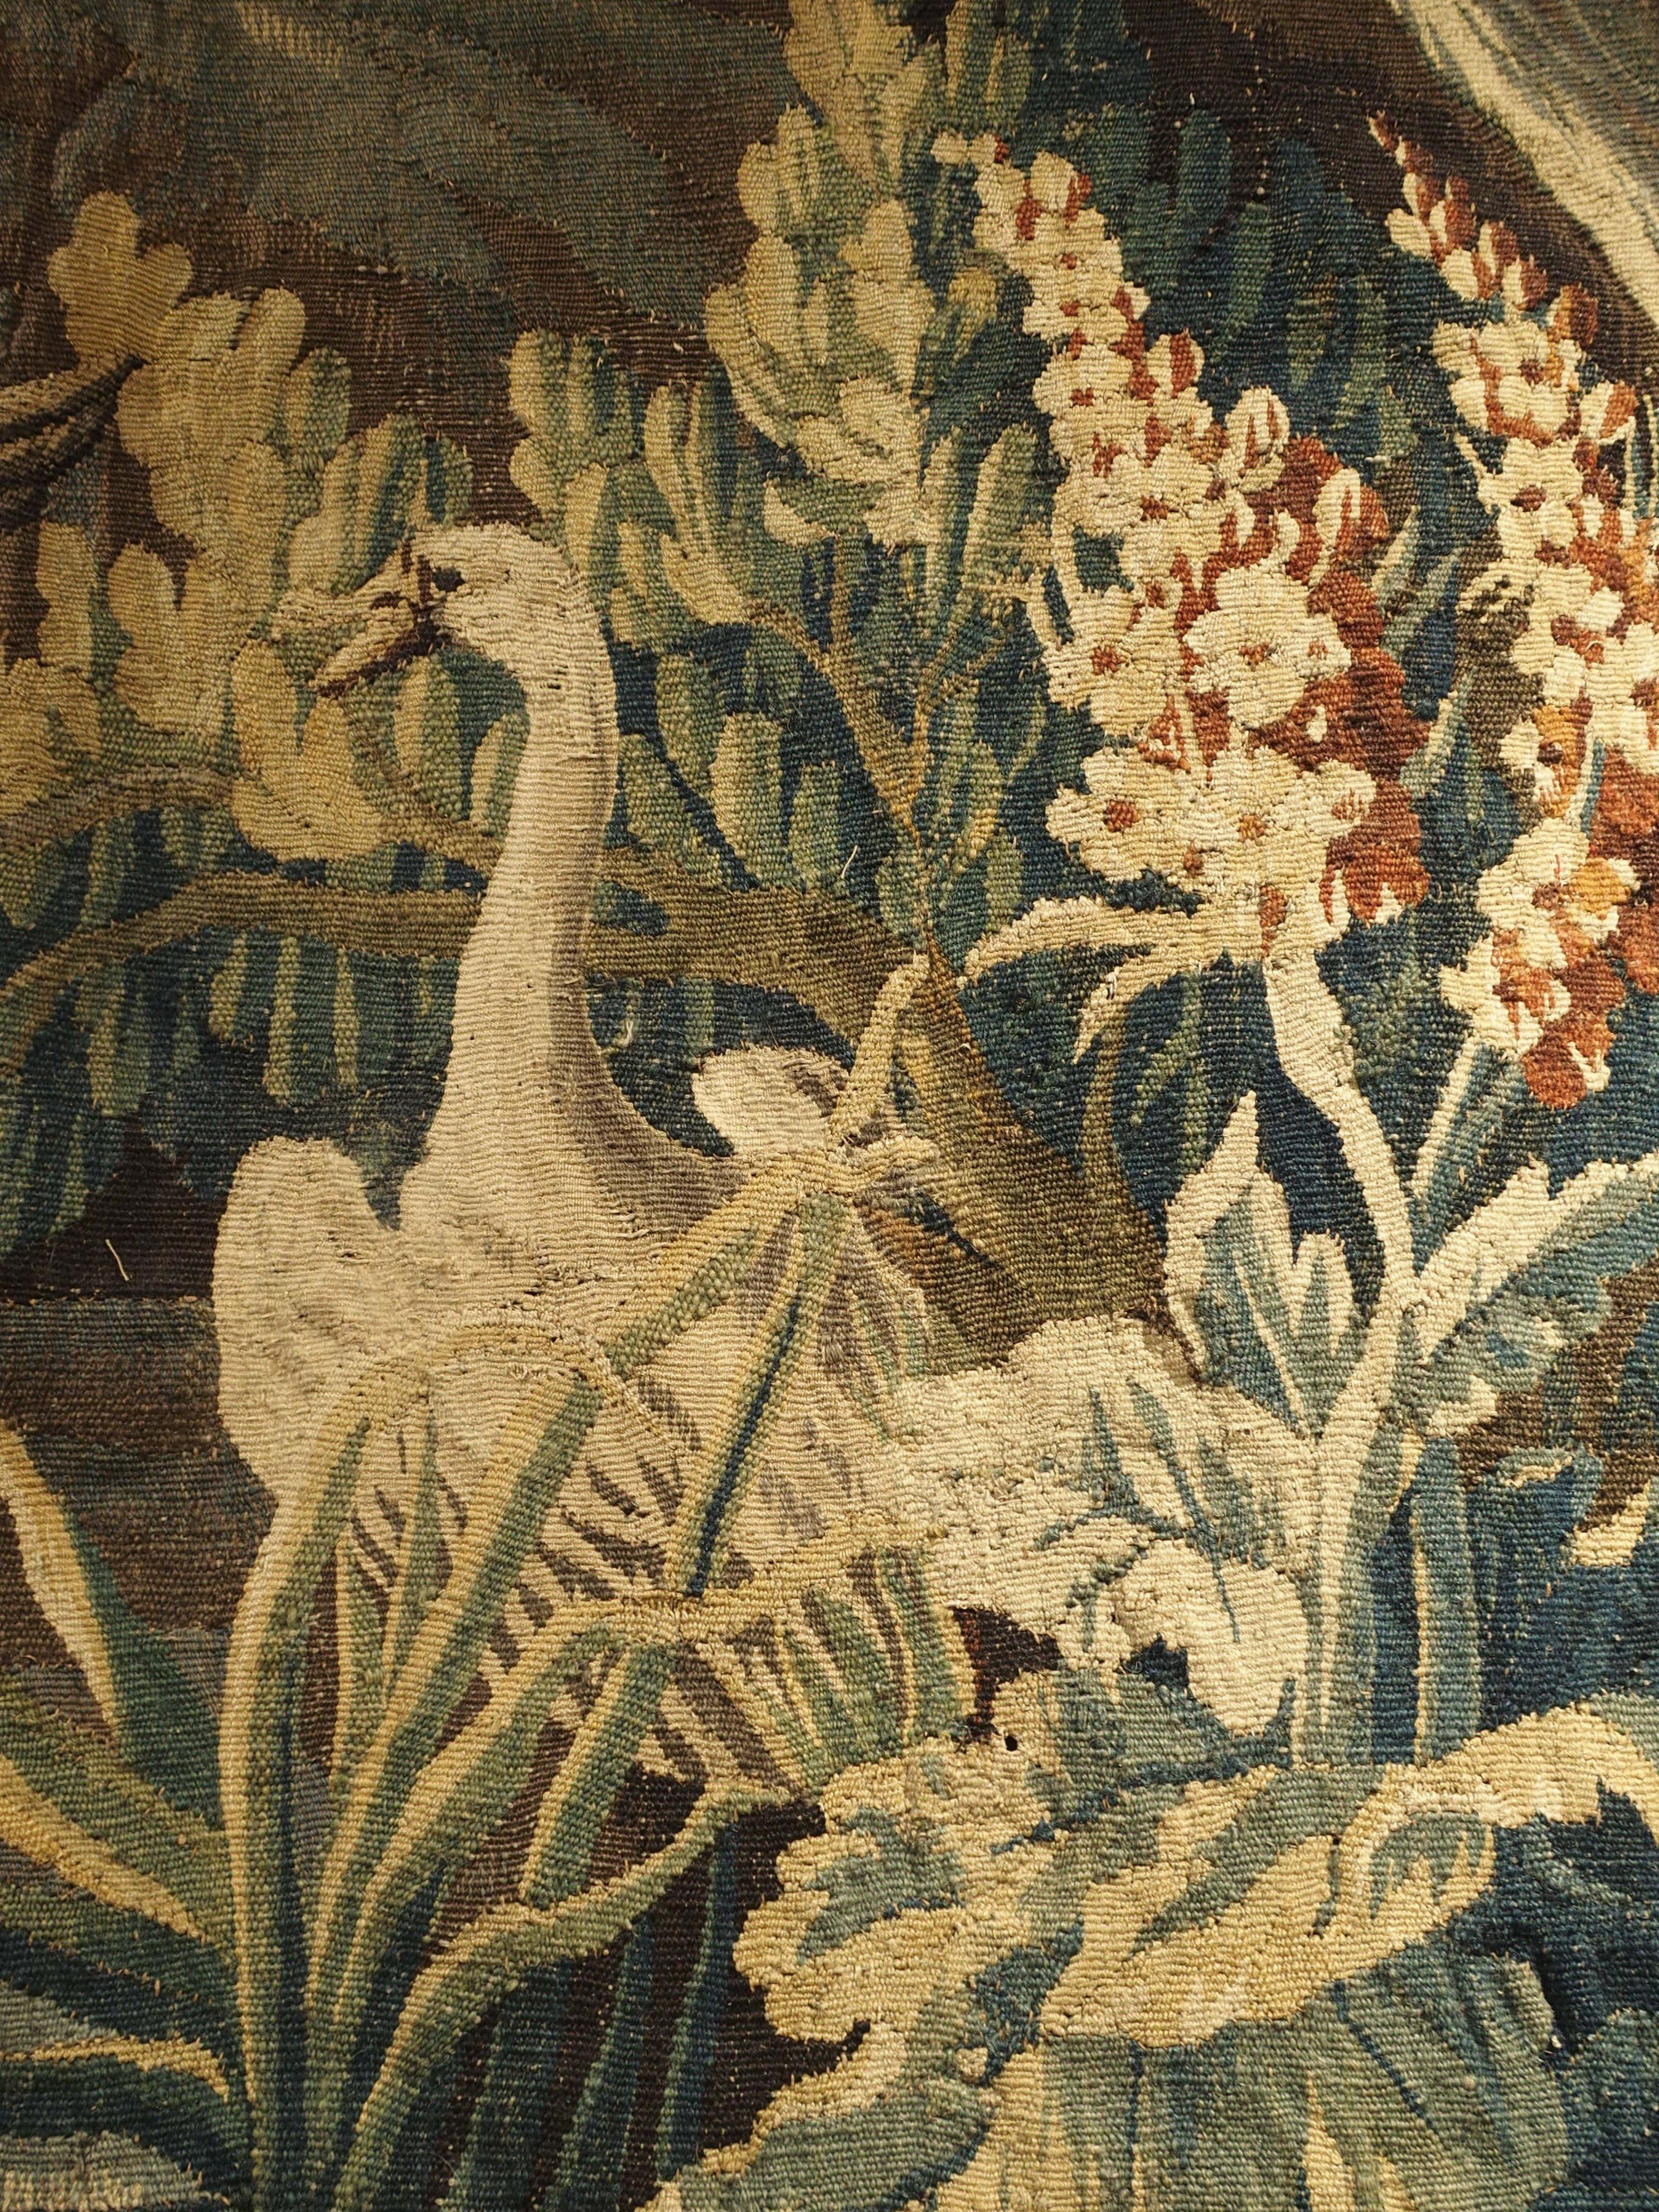 Large 18th Century Wool and Silk Verdure Landscape Tapestry from Flanders 2